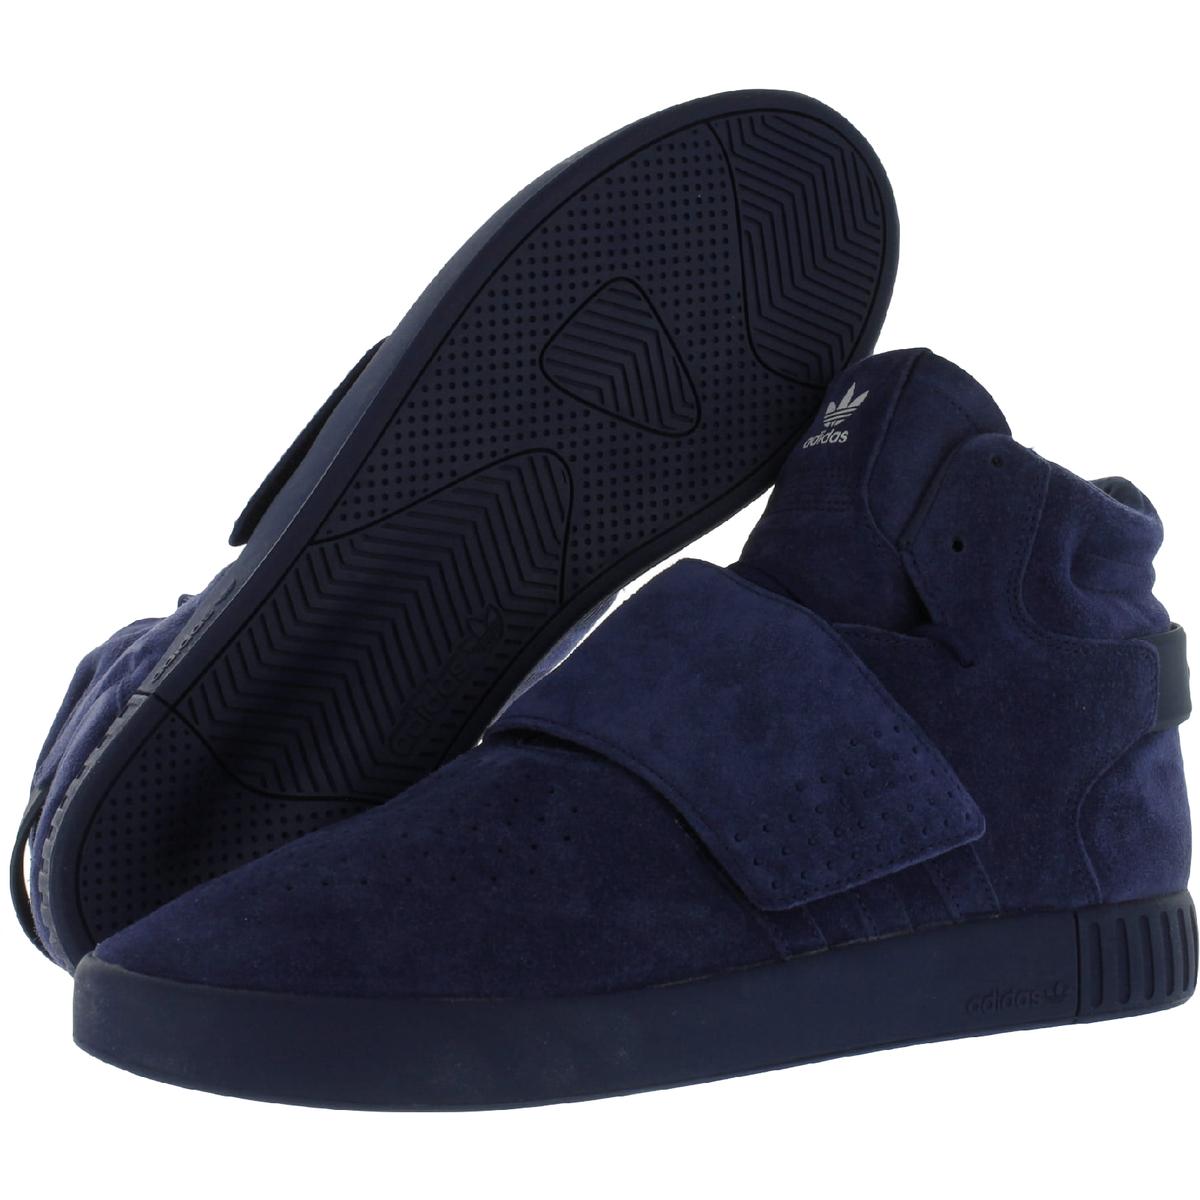 Adidas Tubular Invader Strap Mens Suede High Top Casual and Fashion Sneakers